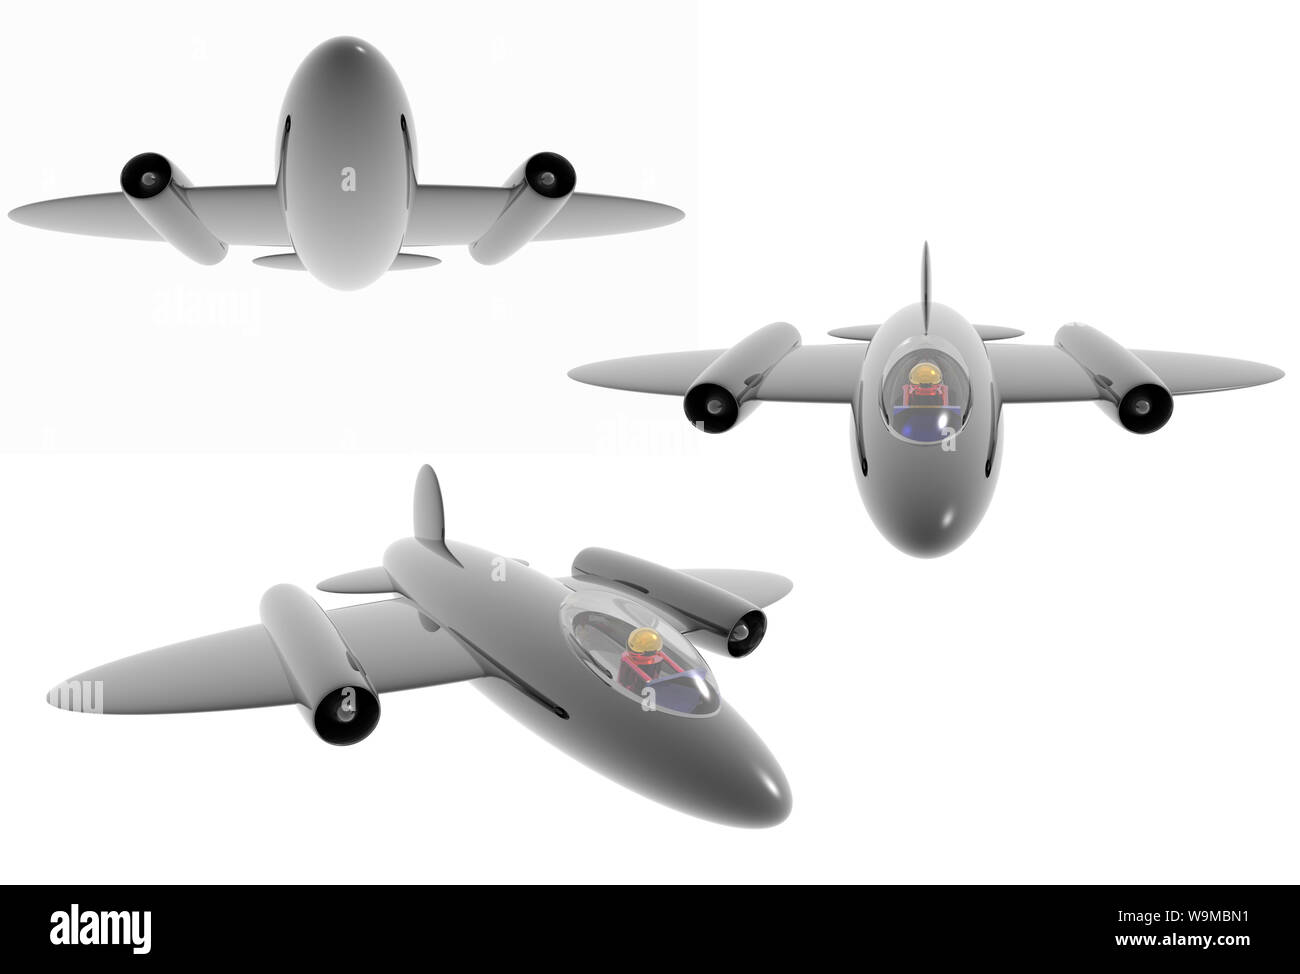 Illustration of a fighterl jet plane three views white background Stock Photo